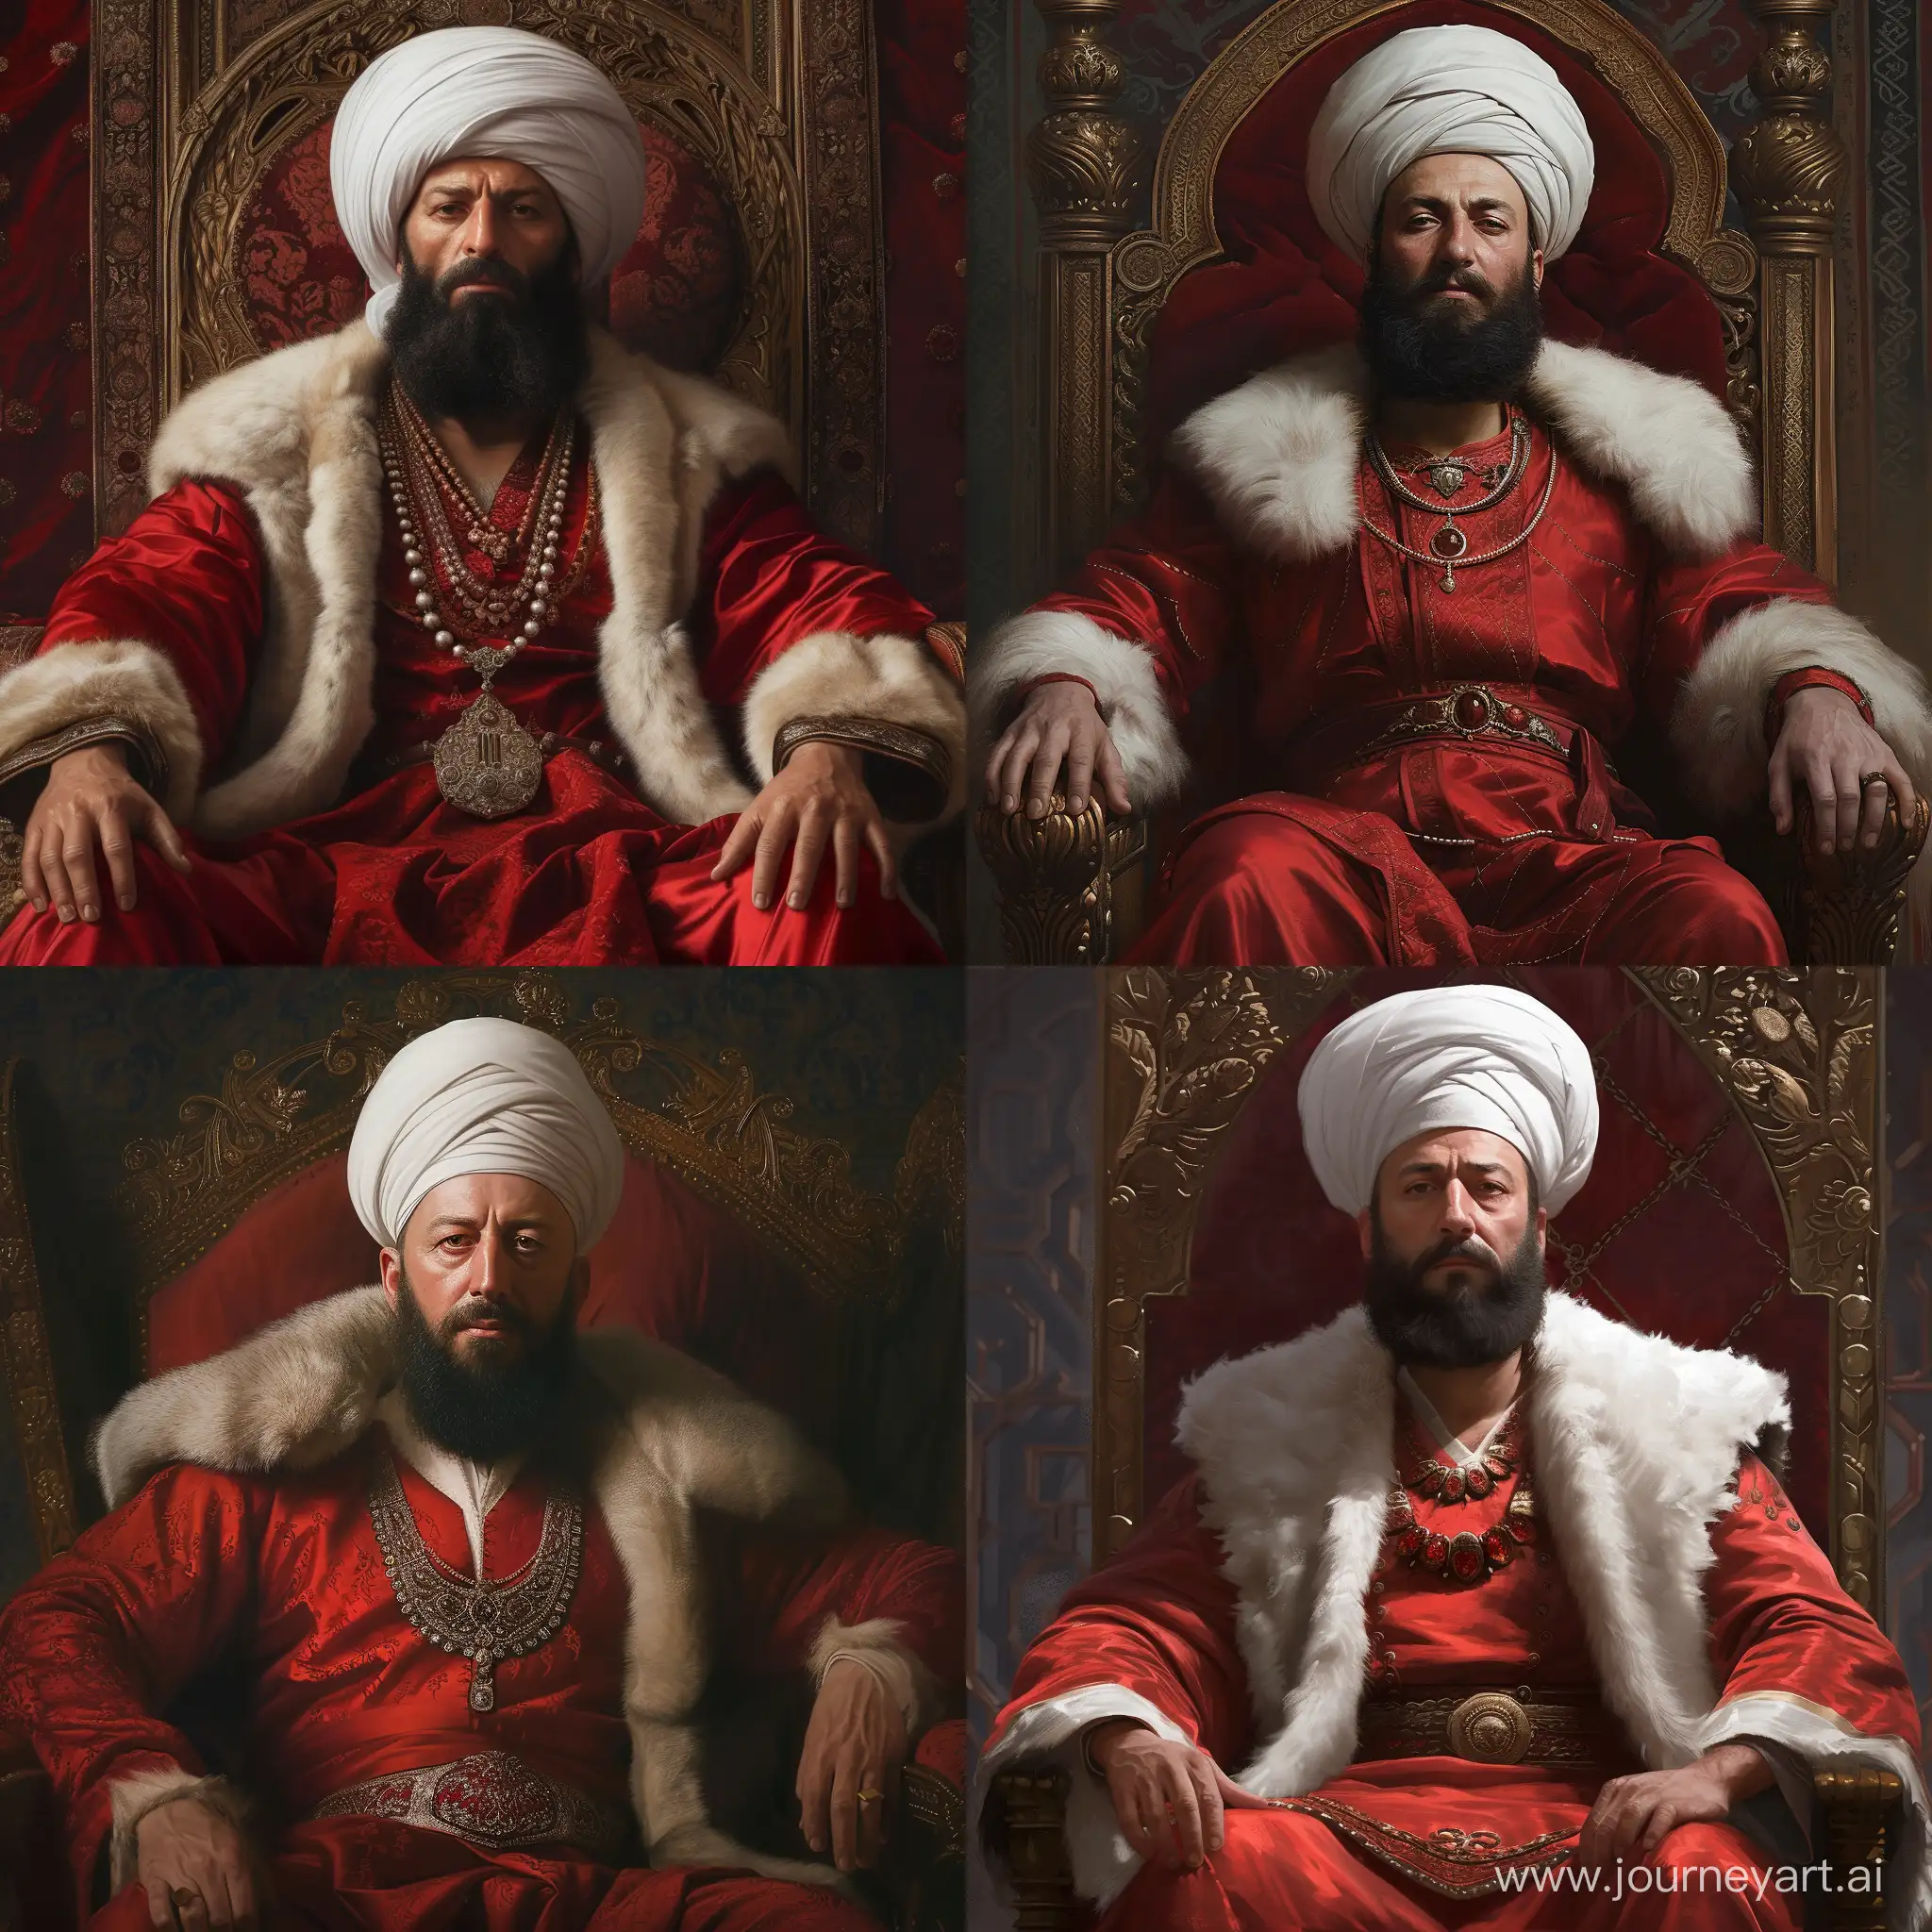 Ottoman Sultan Mehmed II sitting on throne. He has full average black beard. His skin tone is pale. He is wearing white Ottoman turban and red silk caftan with fur collars. He seems proud and brave. Realistic image.